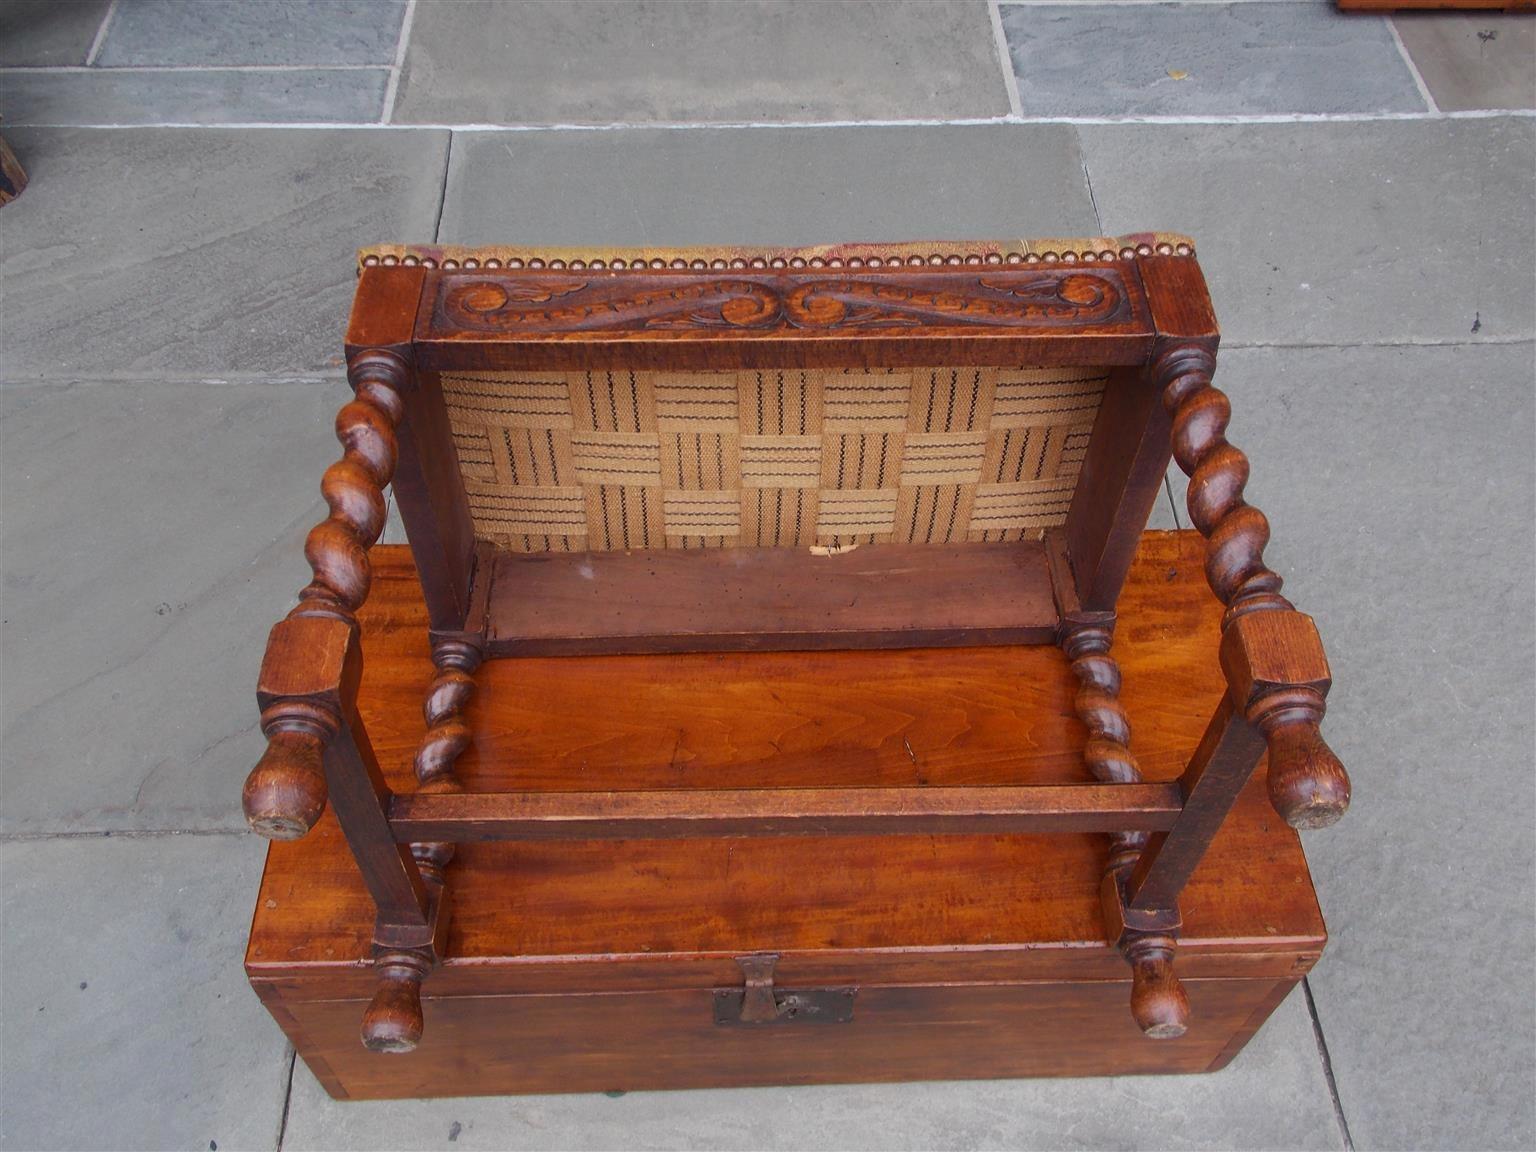 French Walnut Decorative Carved Upholstered Stool with Barley Twist Legs, C 1850 For Sale 5